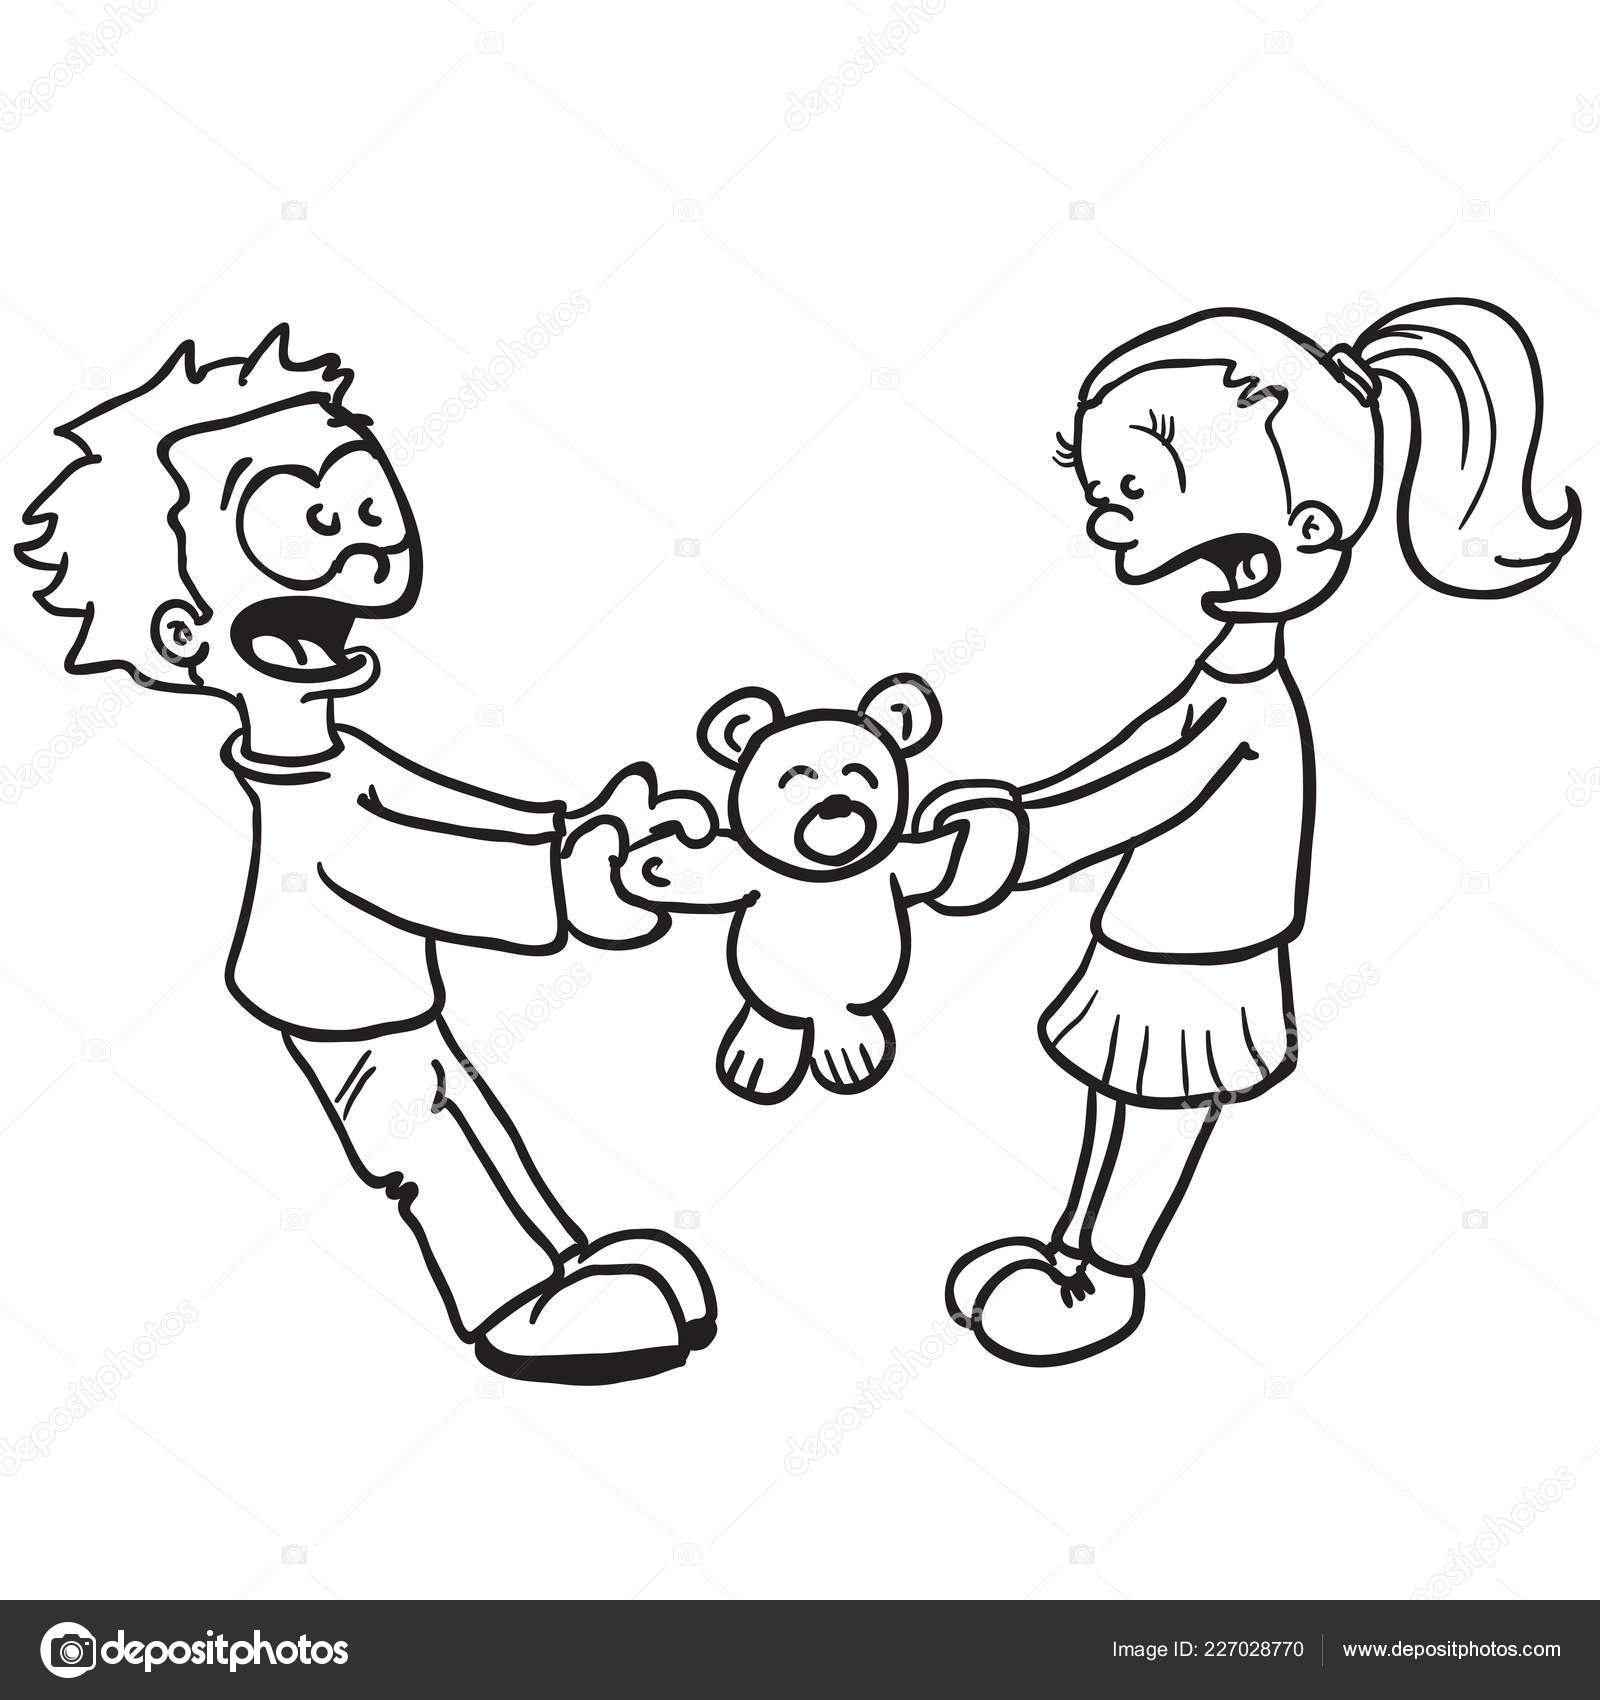 Black White Boy Girl Fighting Cartoon Vector Image By C Ainsel Vector Stock